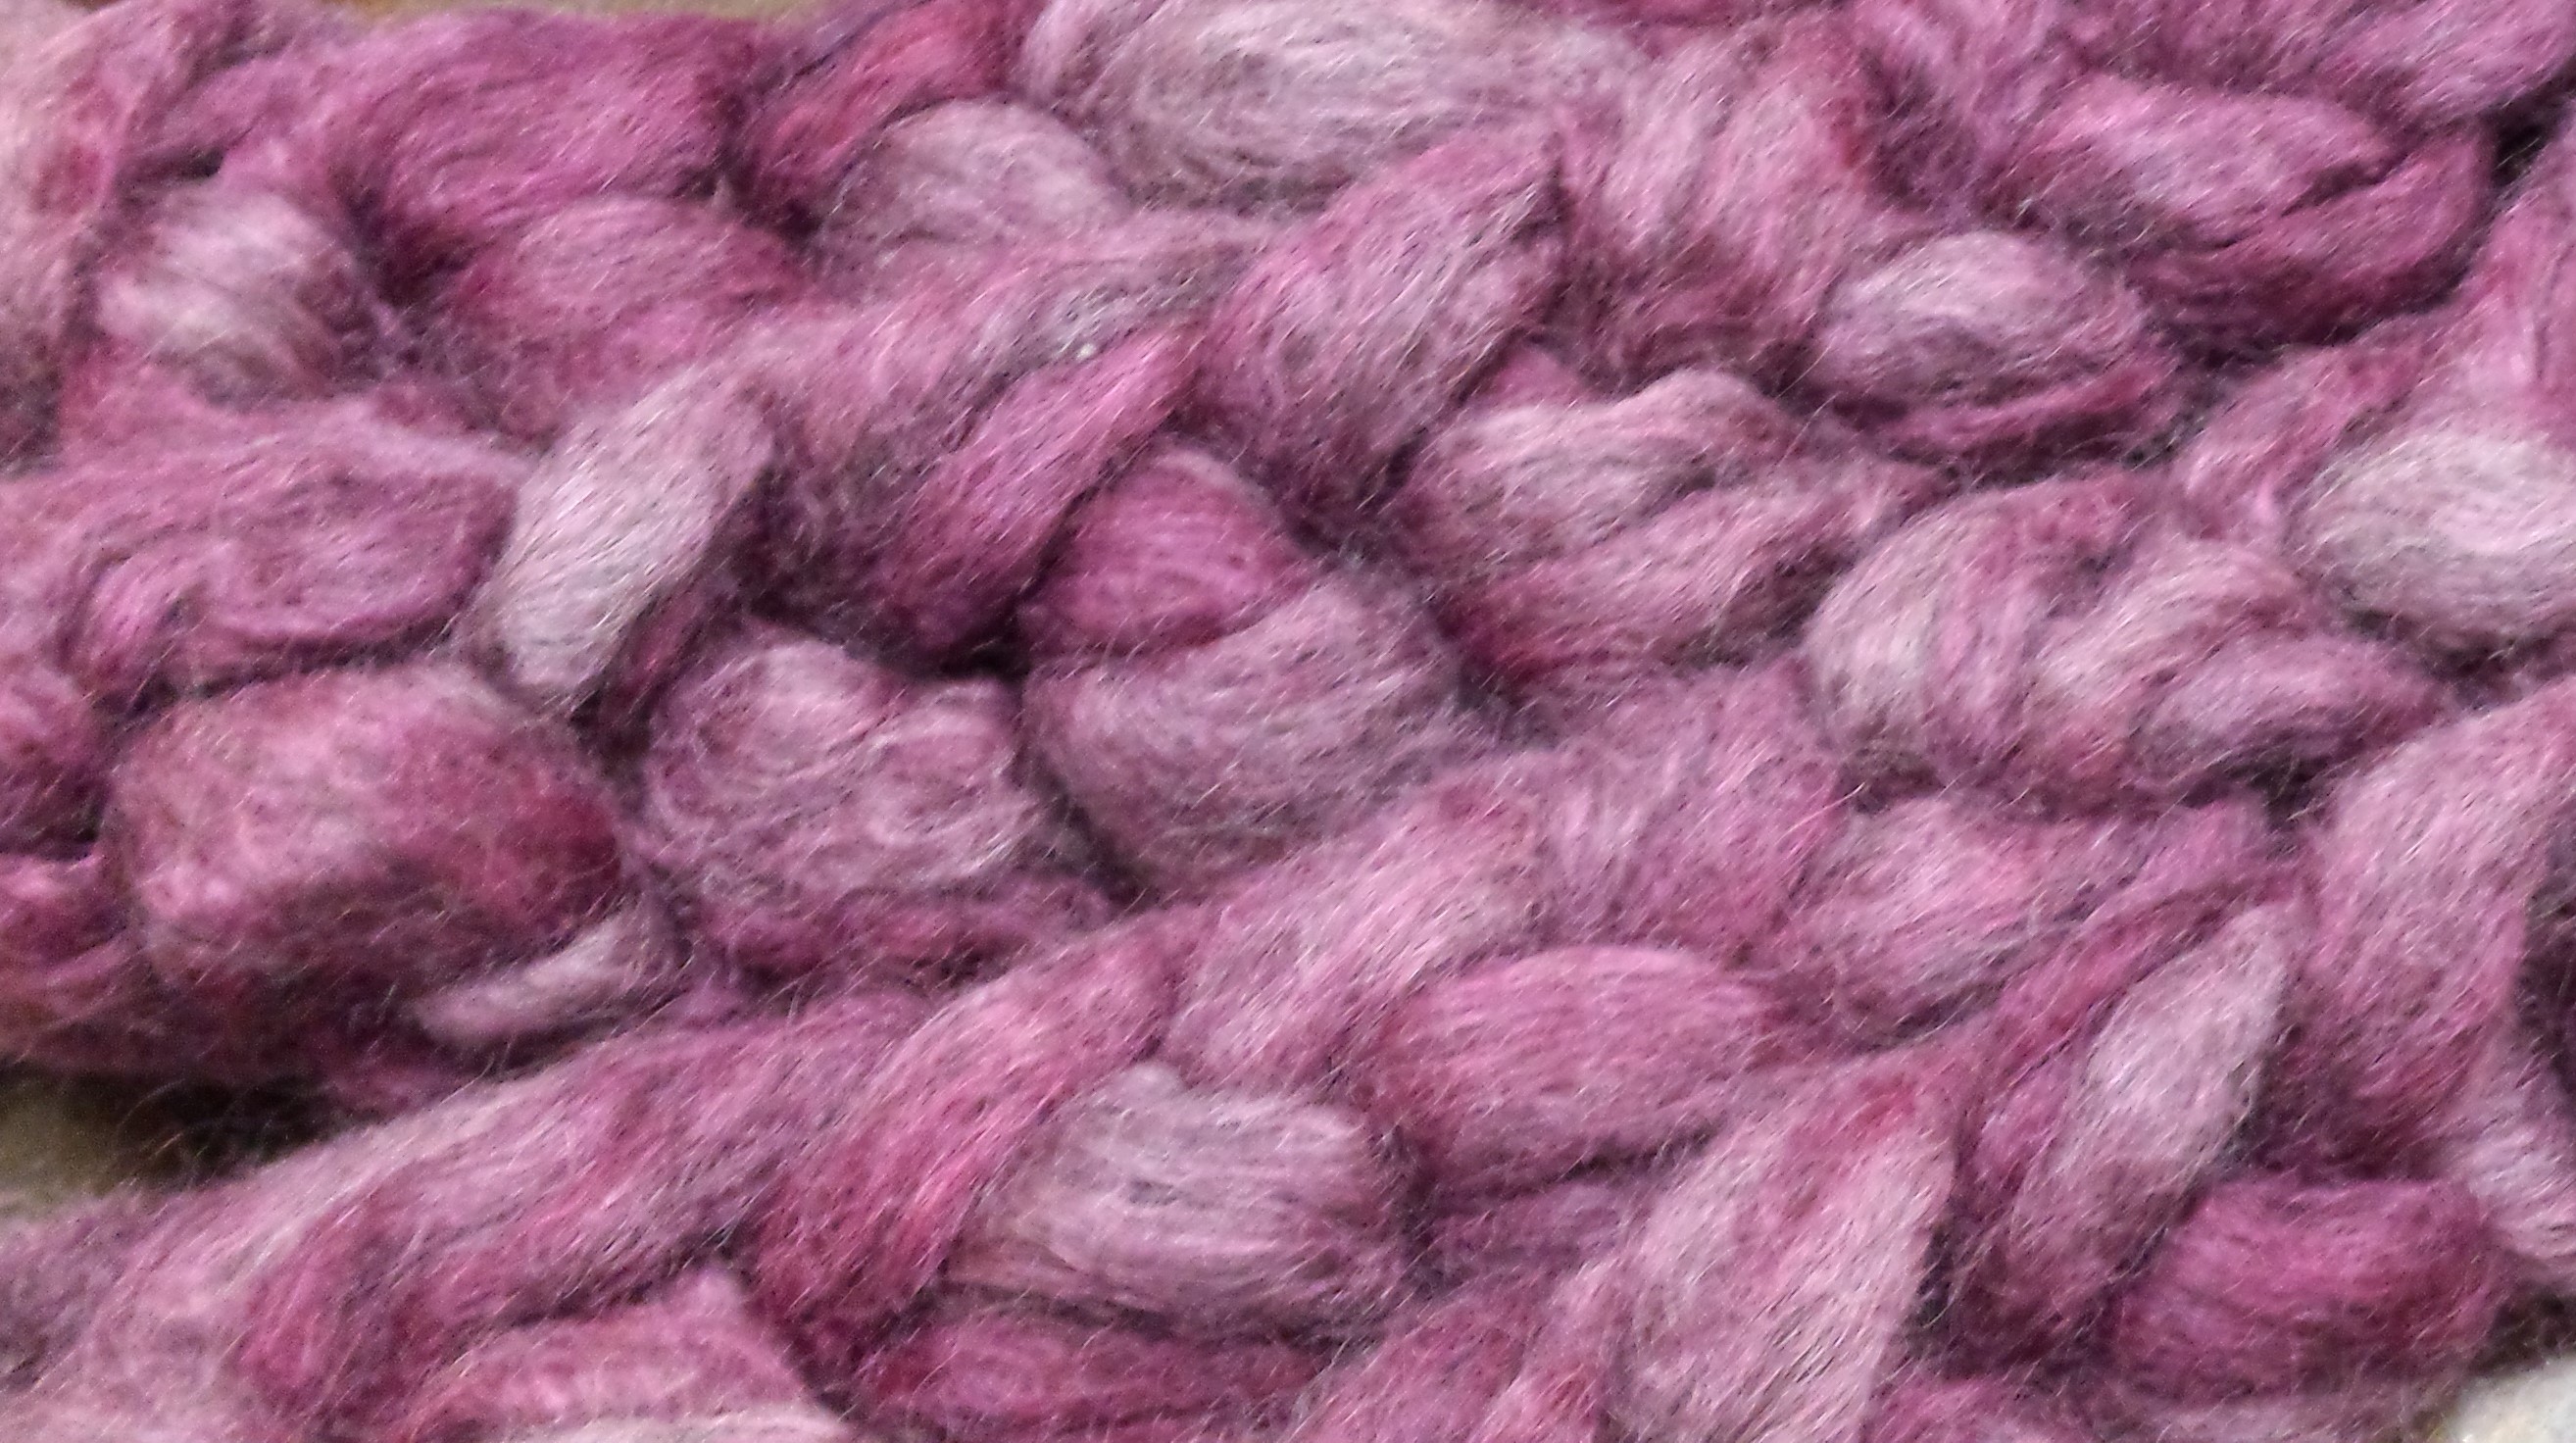 Bewitching Fibers Hand Dyed Gotland Lambswool Combed Top - 3.5 oz - Fuchsia